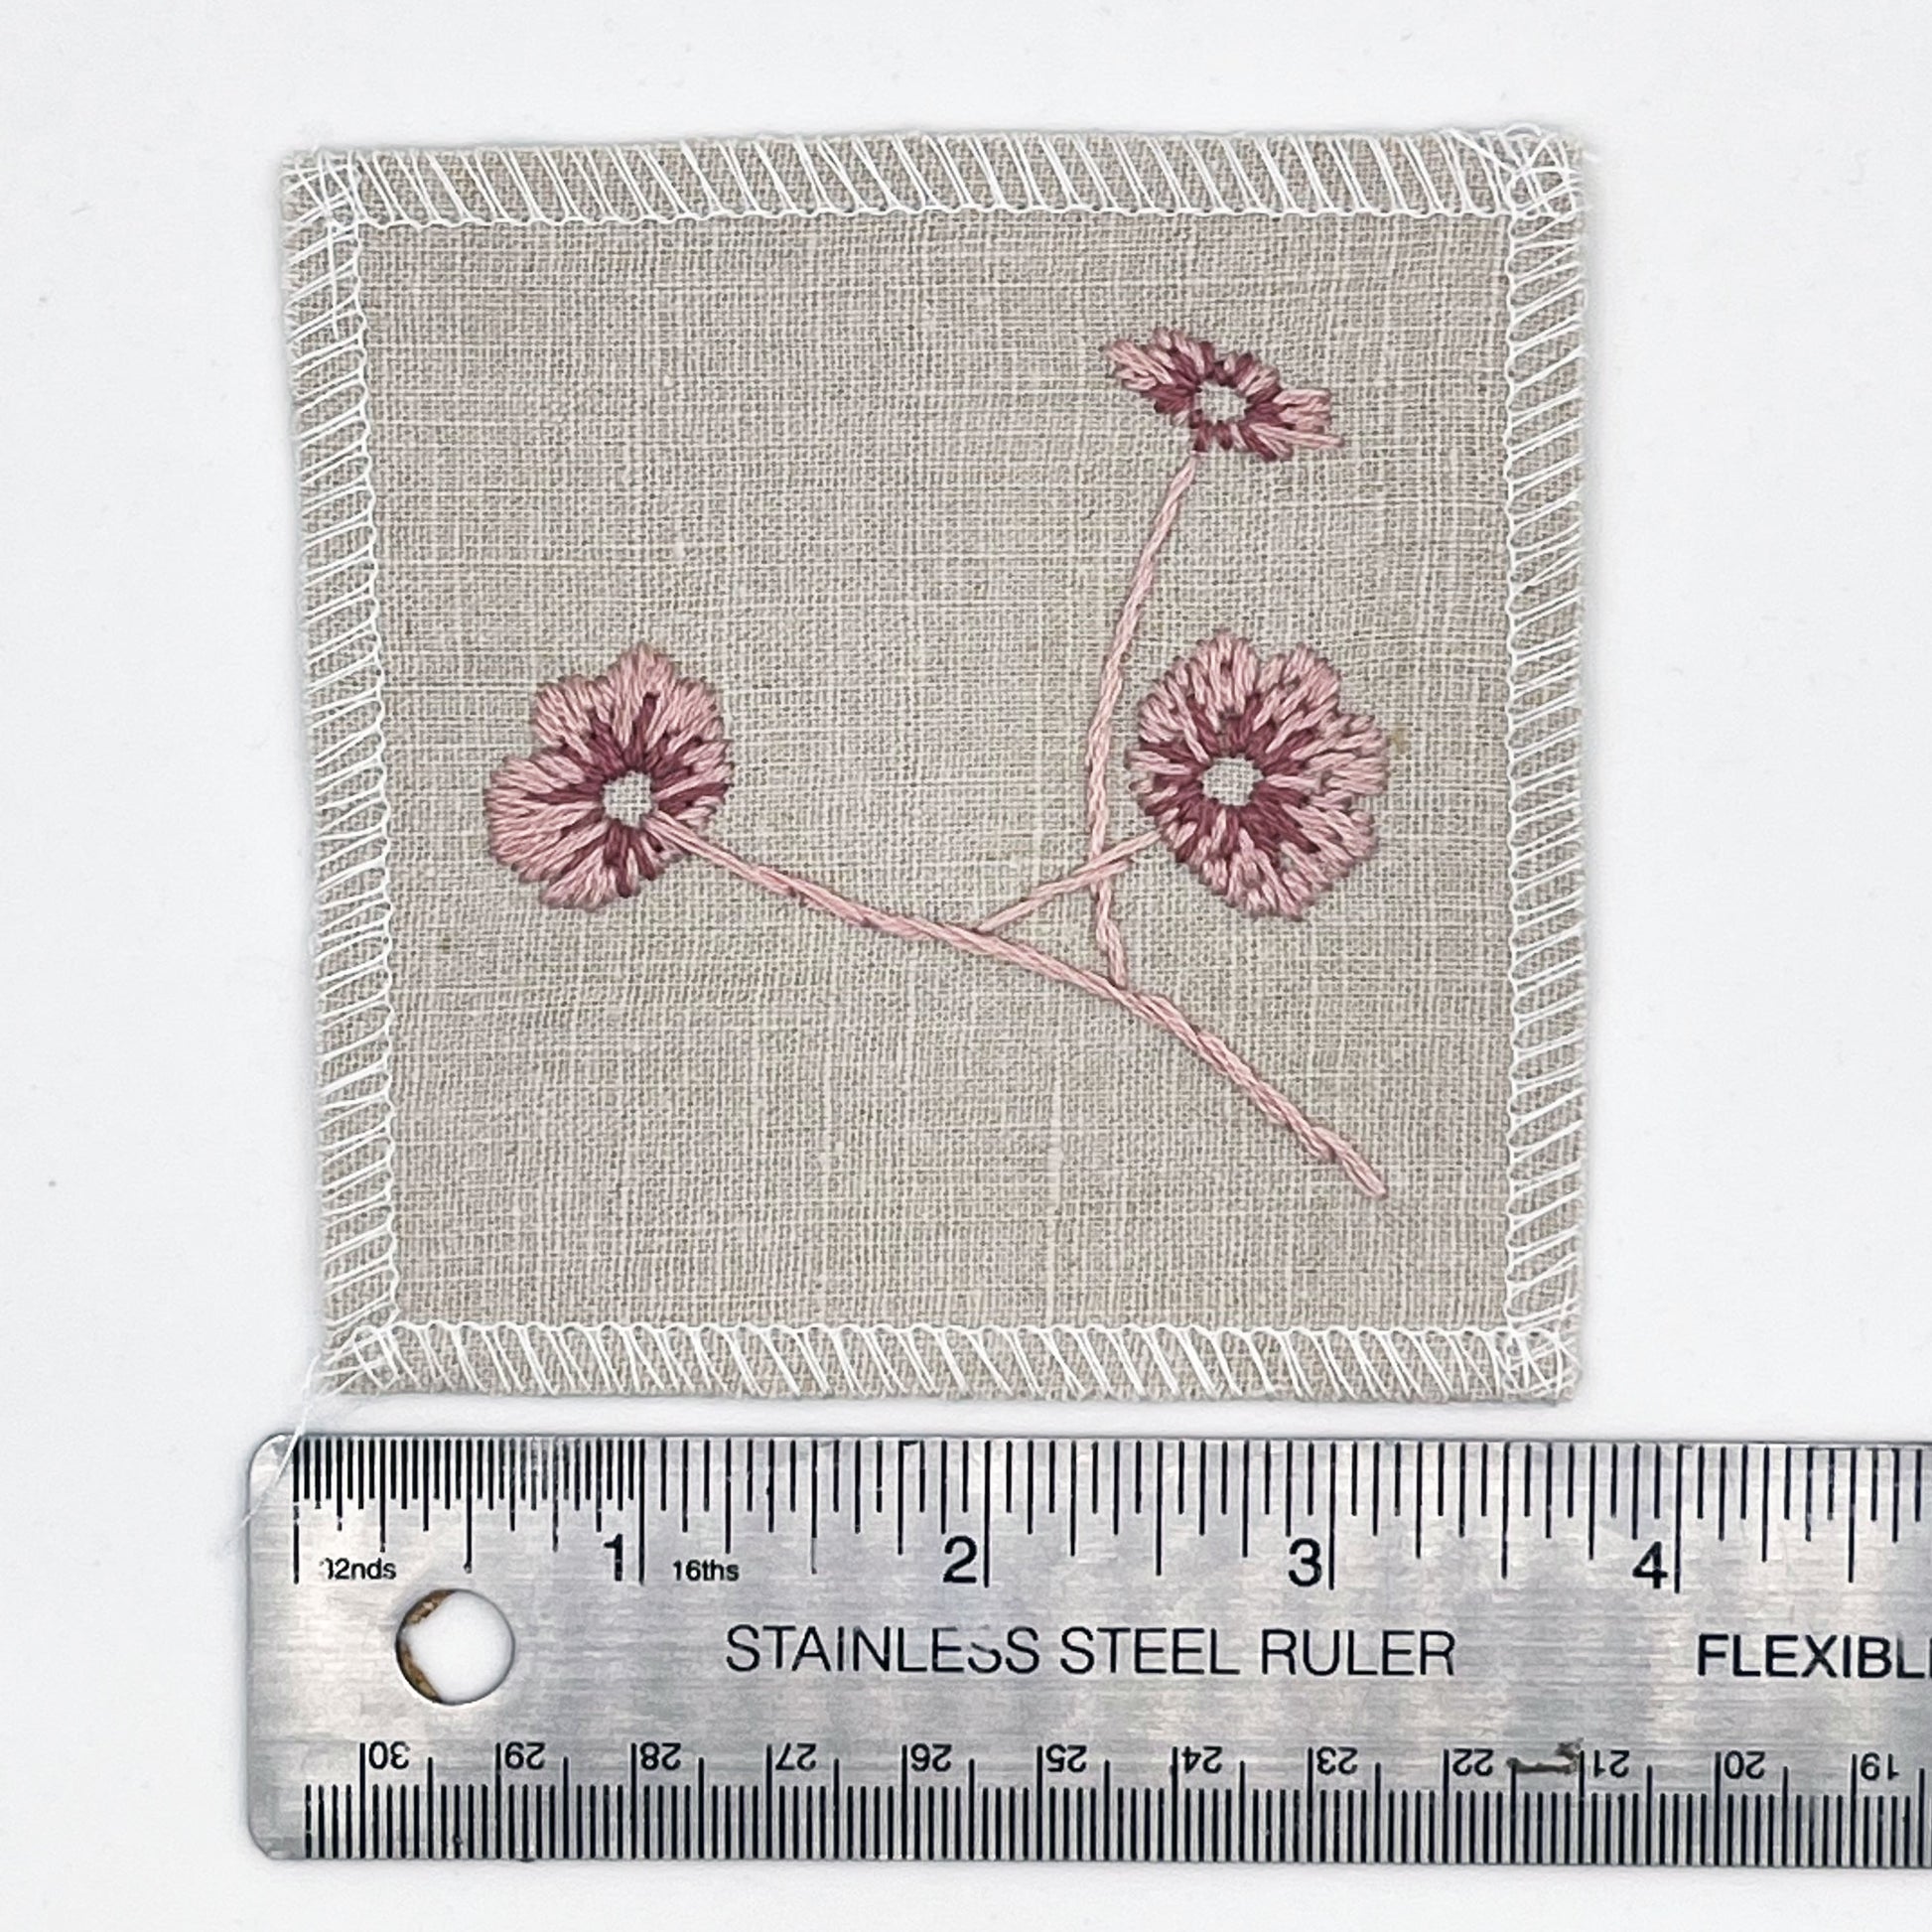 a natural colored square patch, hand embroidered with three poppies on a stem, in shades of pink, with overlocked edges, placed next to a metal ruler to show a width of four inches, on a white background